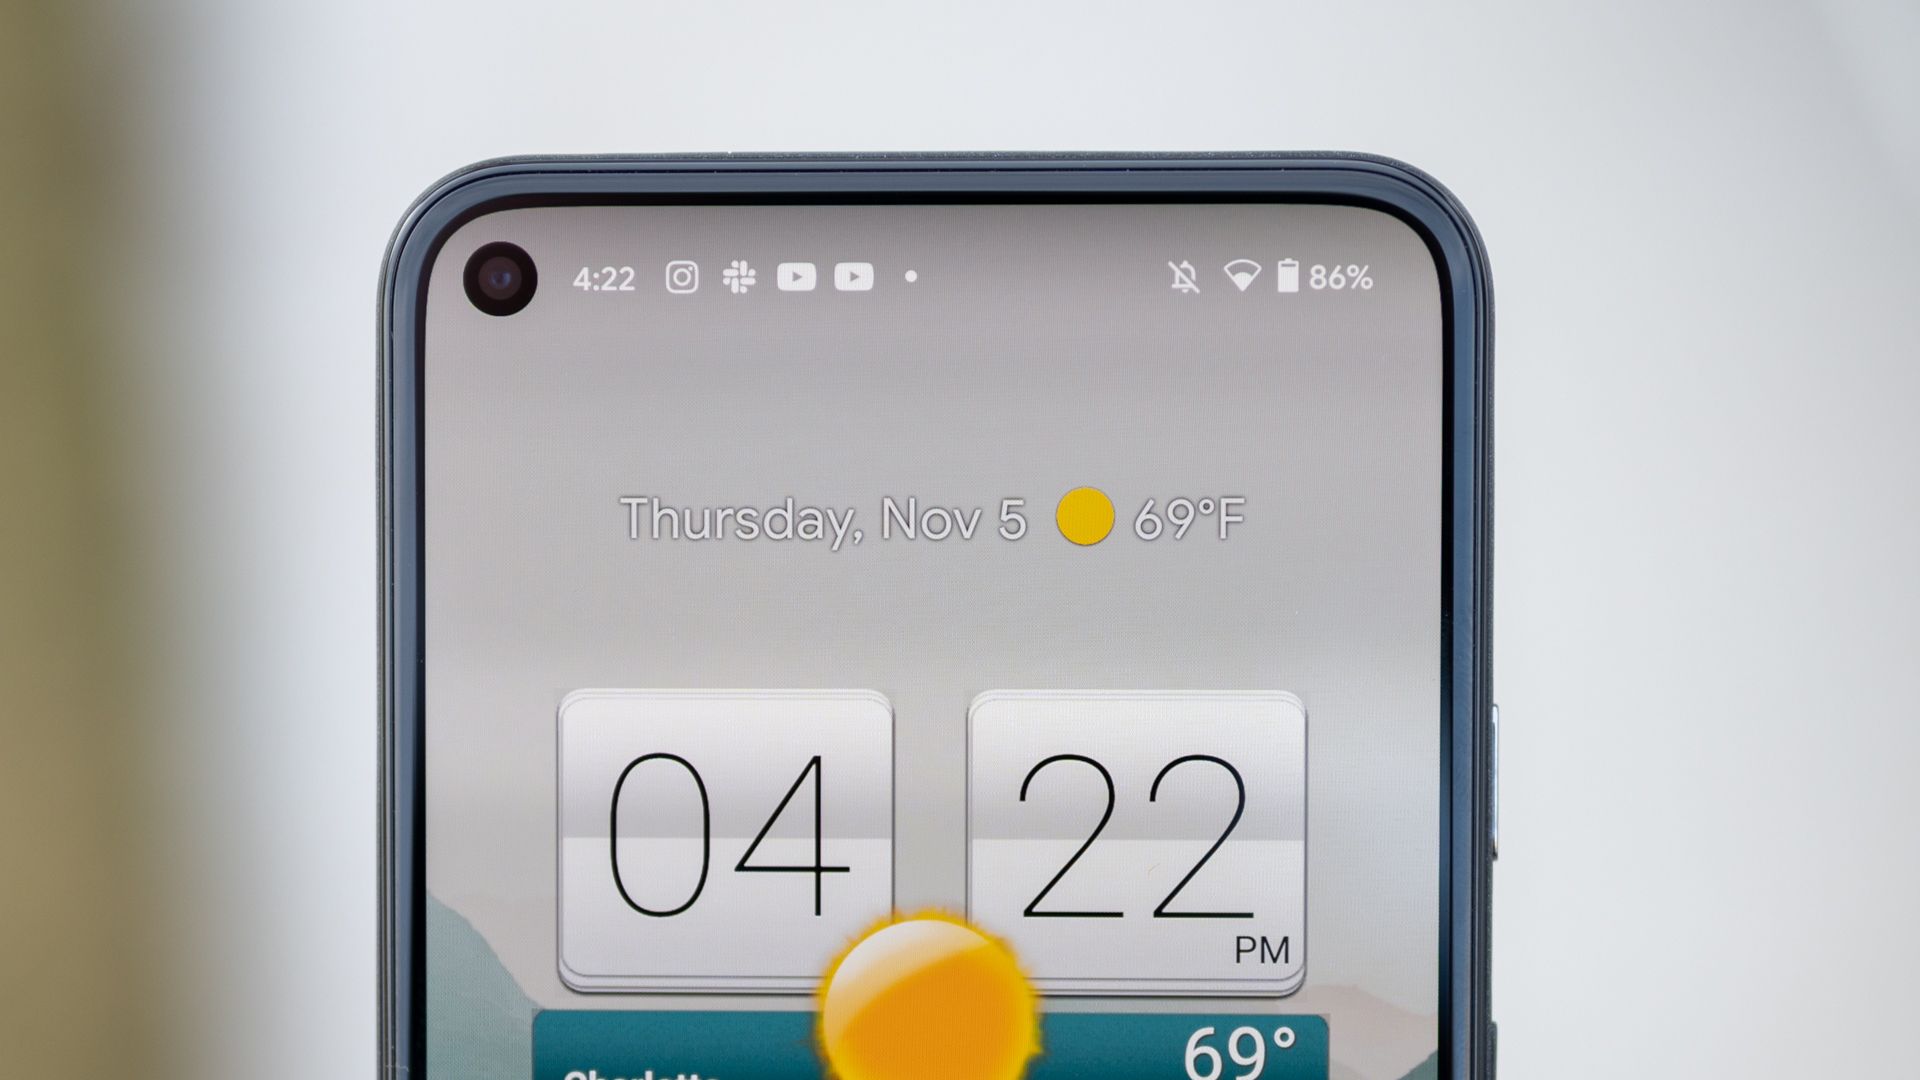 A close up of the top half of the Pixel 5's display, showing the hole punch camera cutout